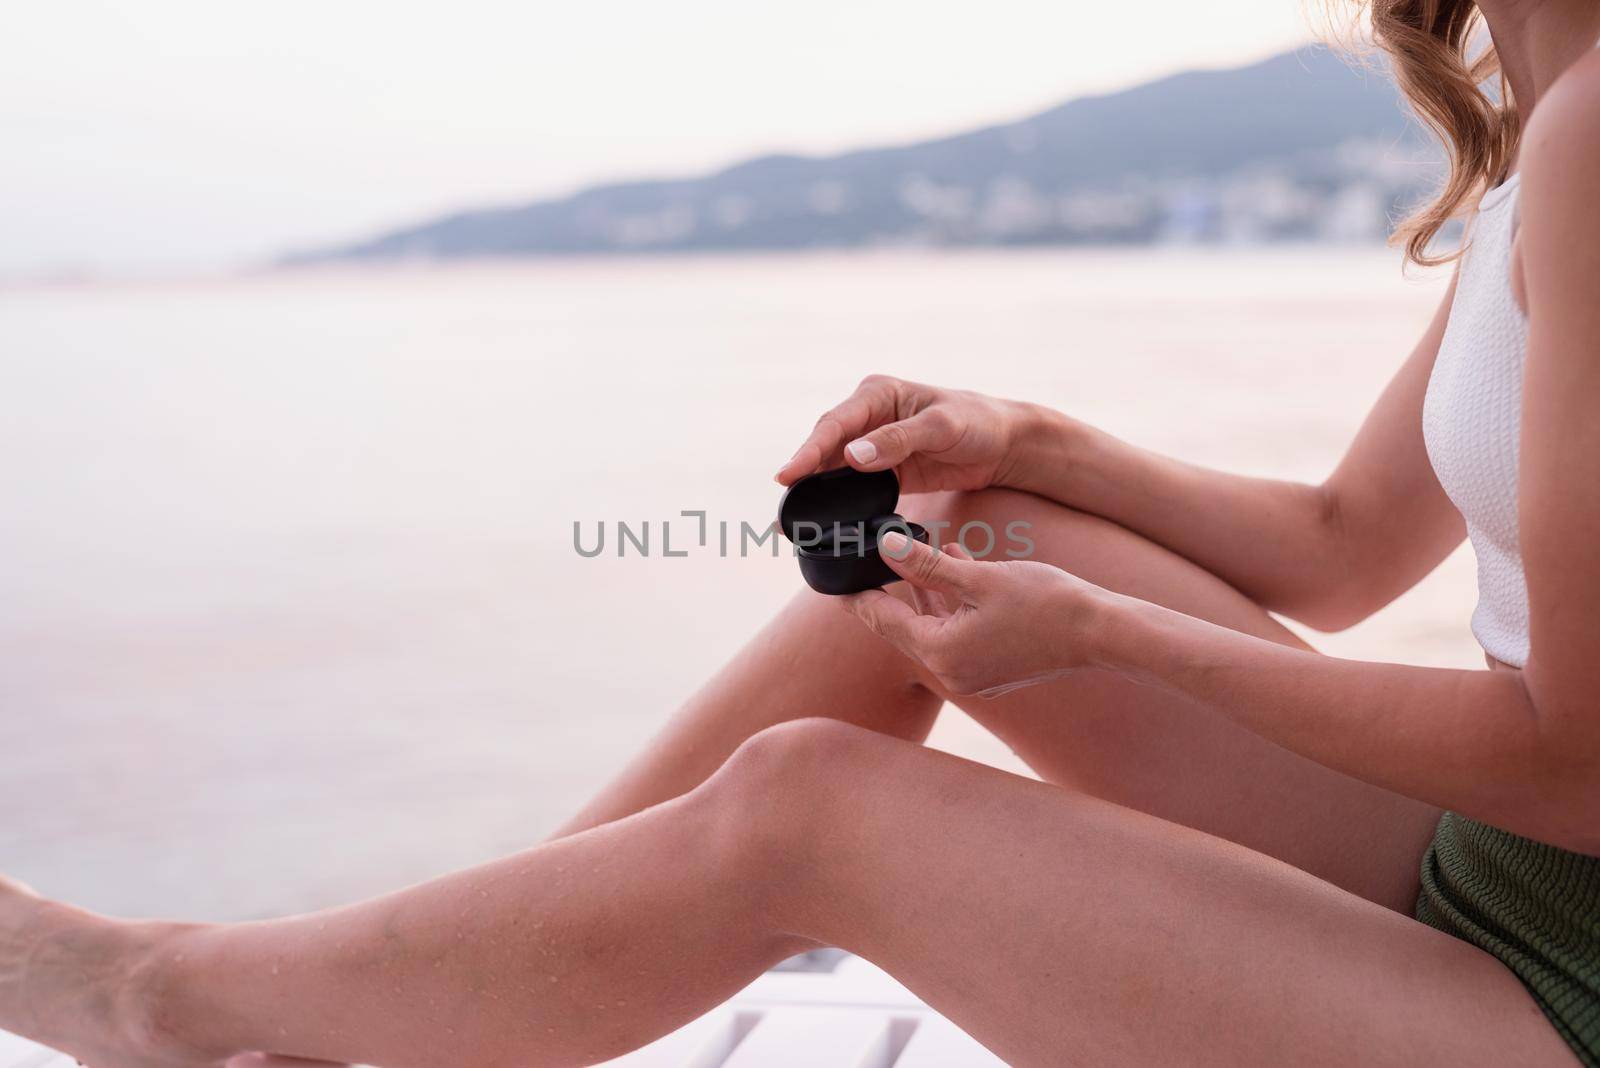 Woman sitting on the sun lounger opening a box with wireless earpieces, ready for listening to the music